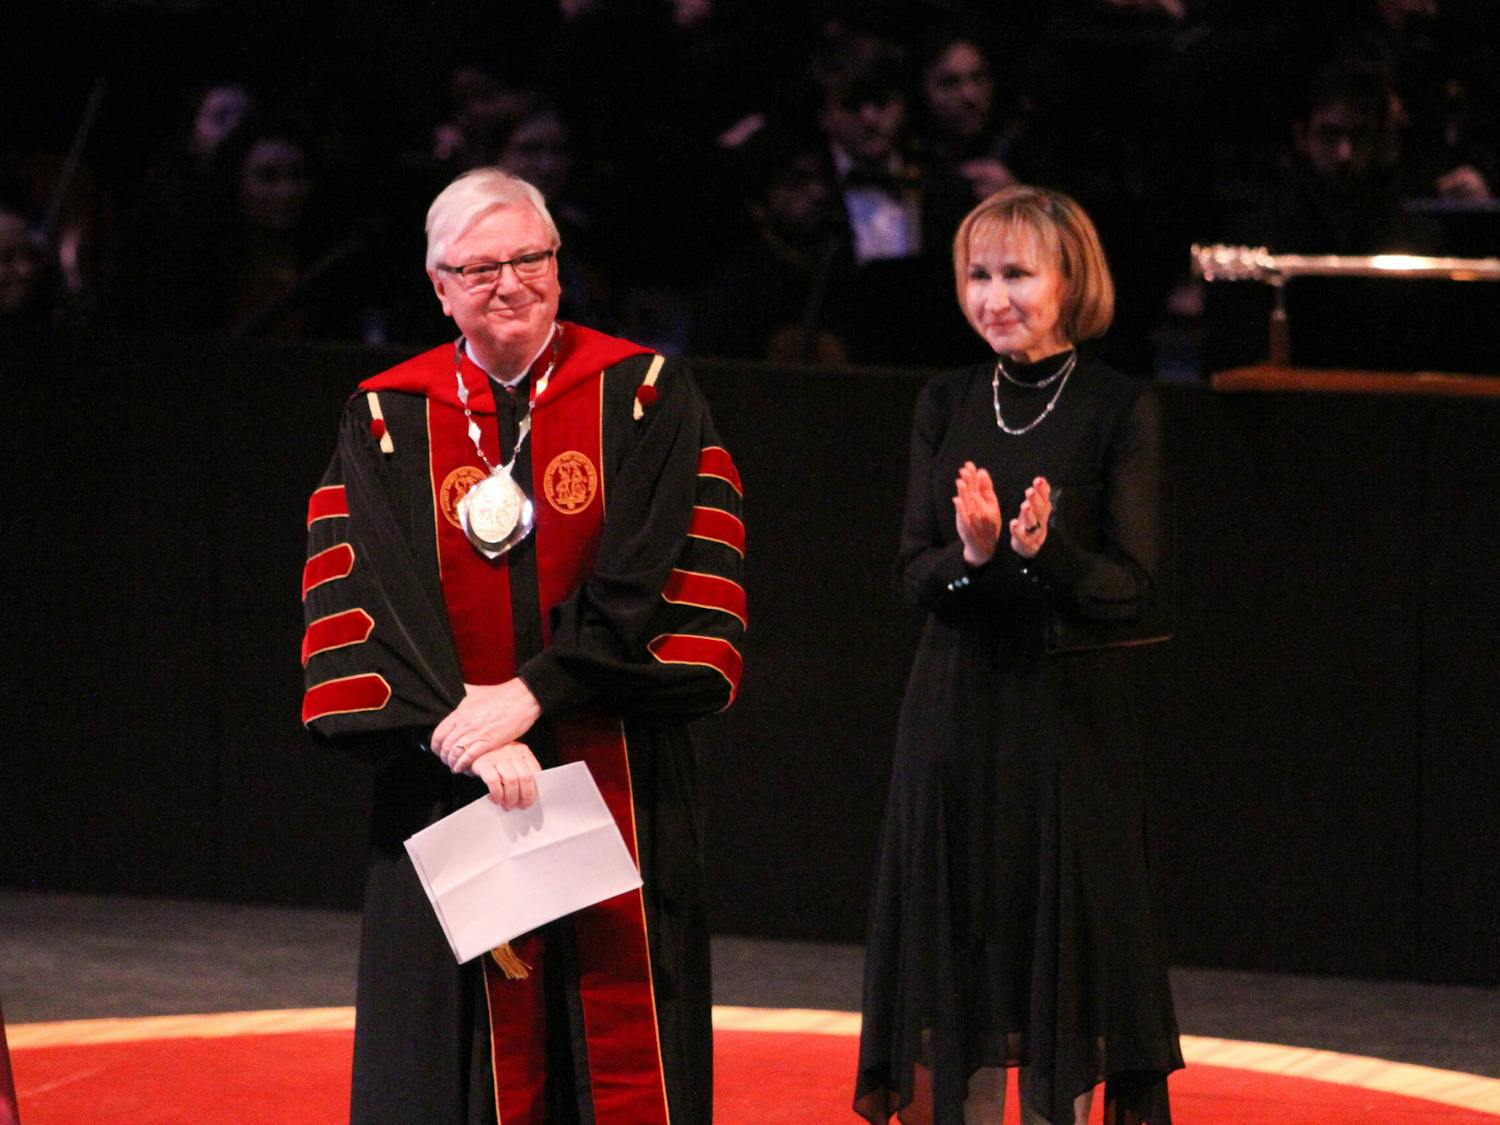 President Michael Amiridis, alongside first lady Ero Aggelopoulou-Amiridis, cast smiles toward those in attendance during the Presidential Investiture Ceremony of Amiridis on Jan. 20, 2023, at the Koger Center for the Arts. Amiridis was invested as the University of South Carolina’s 30th president.